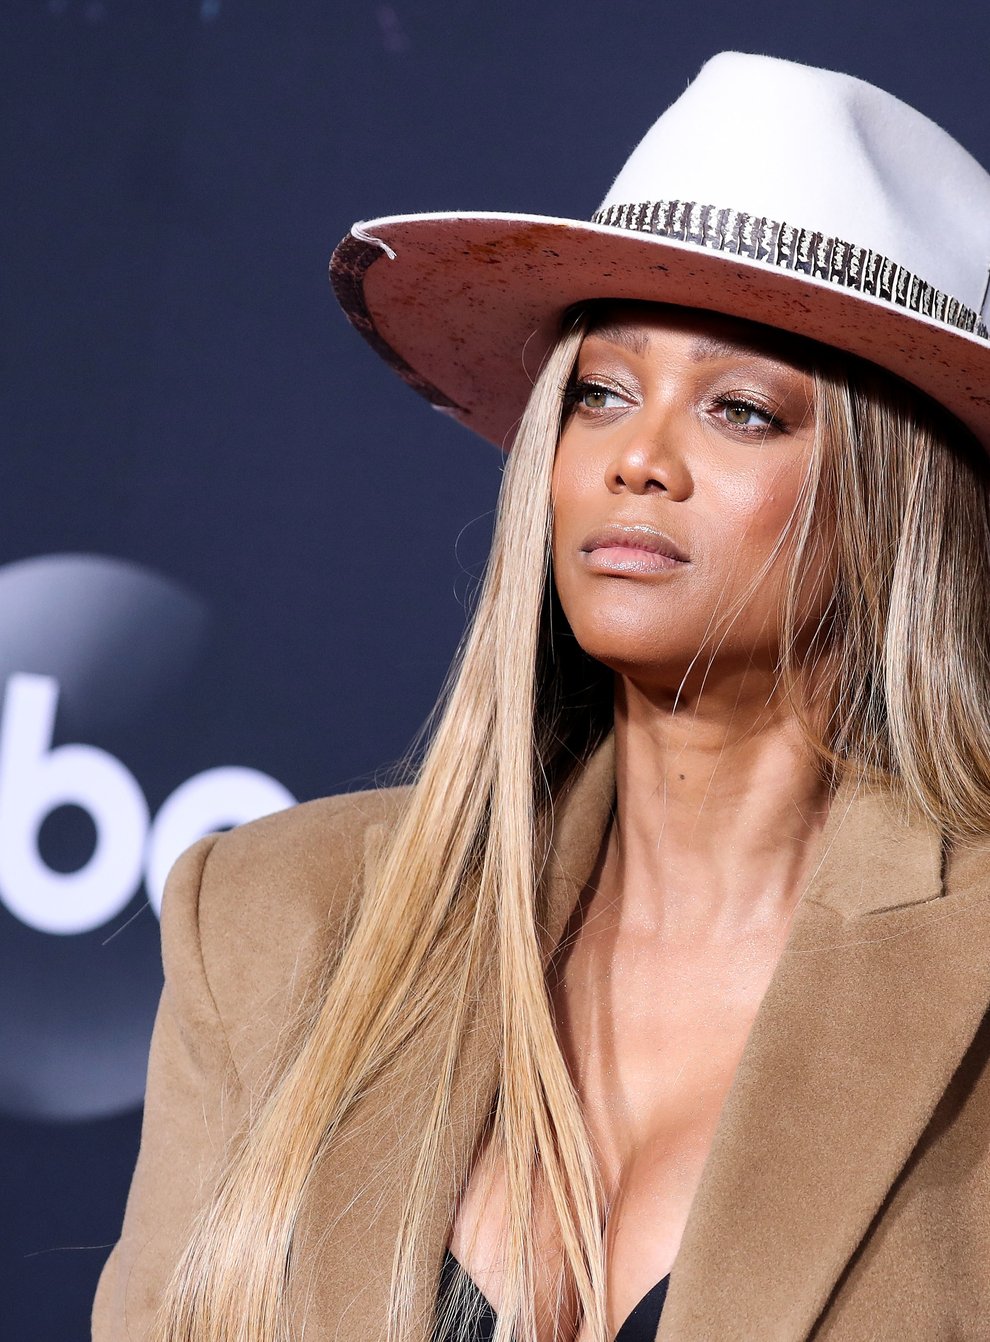 Tyra Banks is the new host of Dancing With The Stars